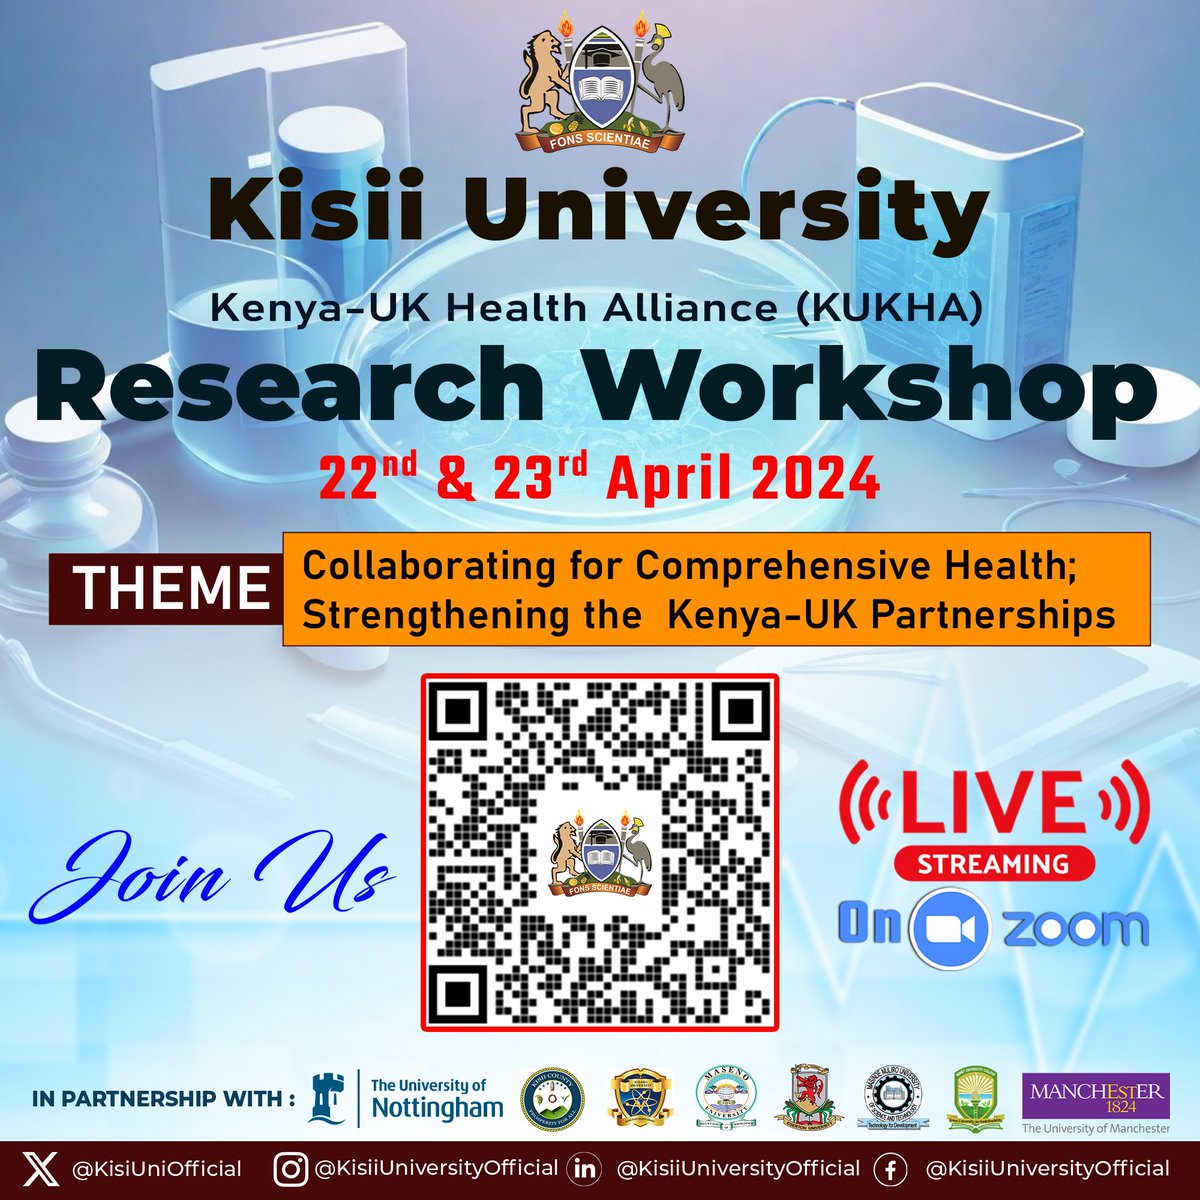 The Kenya UK-Health Alliance Research Conference has commenced. Find out what health education is evolving to with us. #KisiiUniversity #HealthFirst @UniofNottingham @MedicineUoN